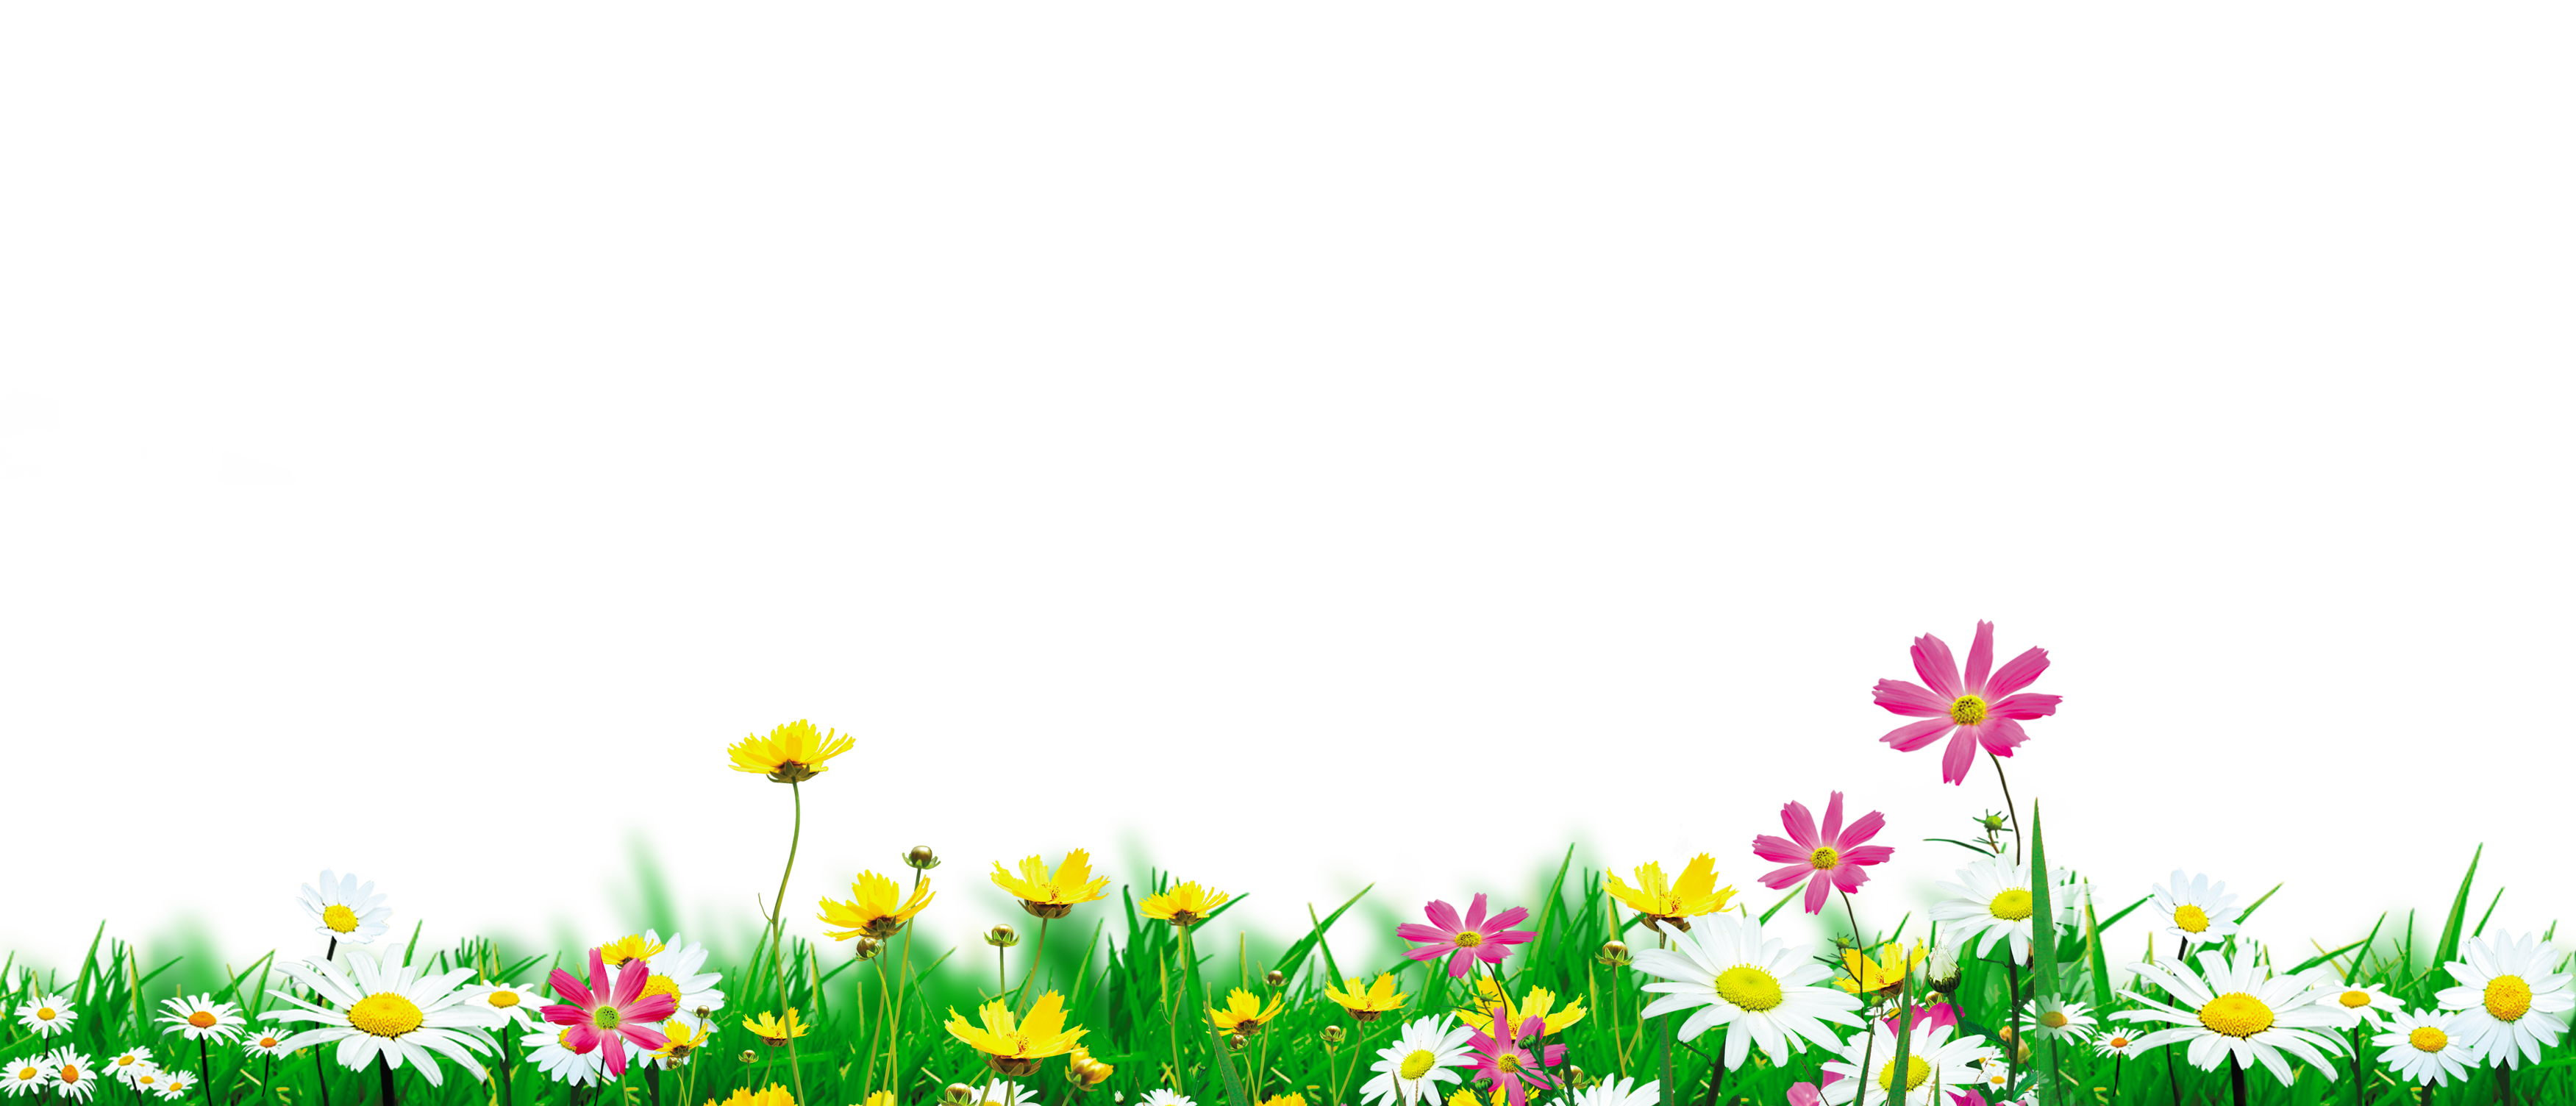 Download Nature - Flowers in full bloom natural environment png